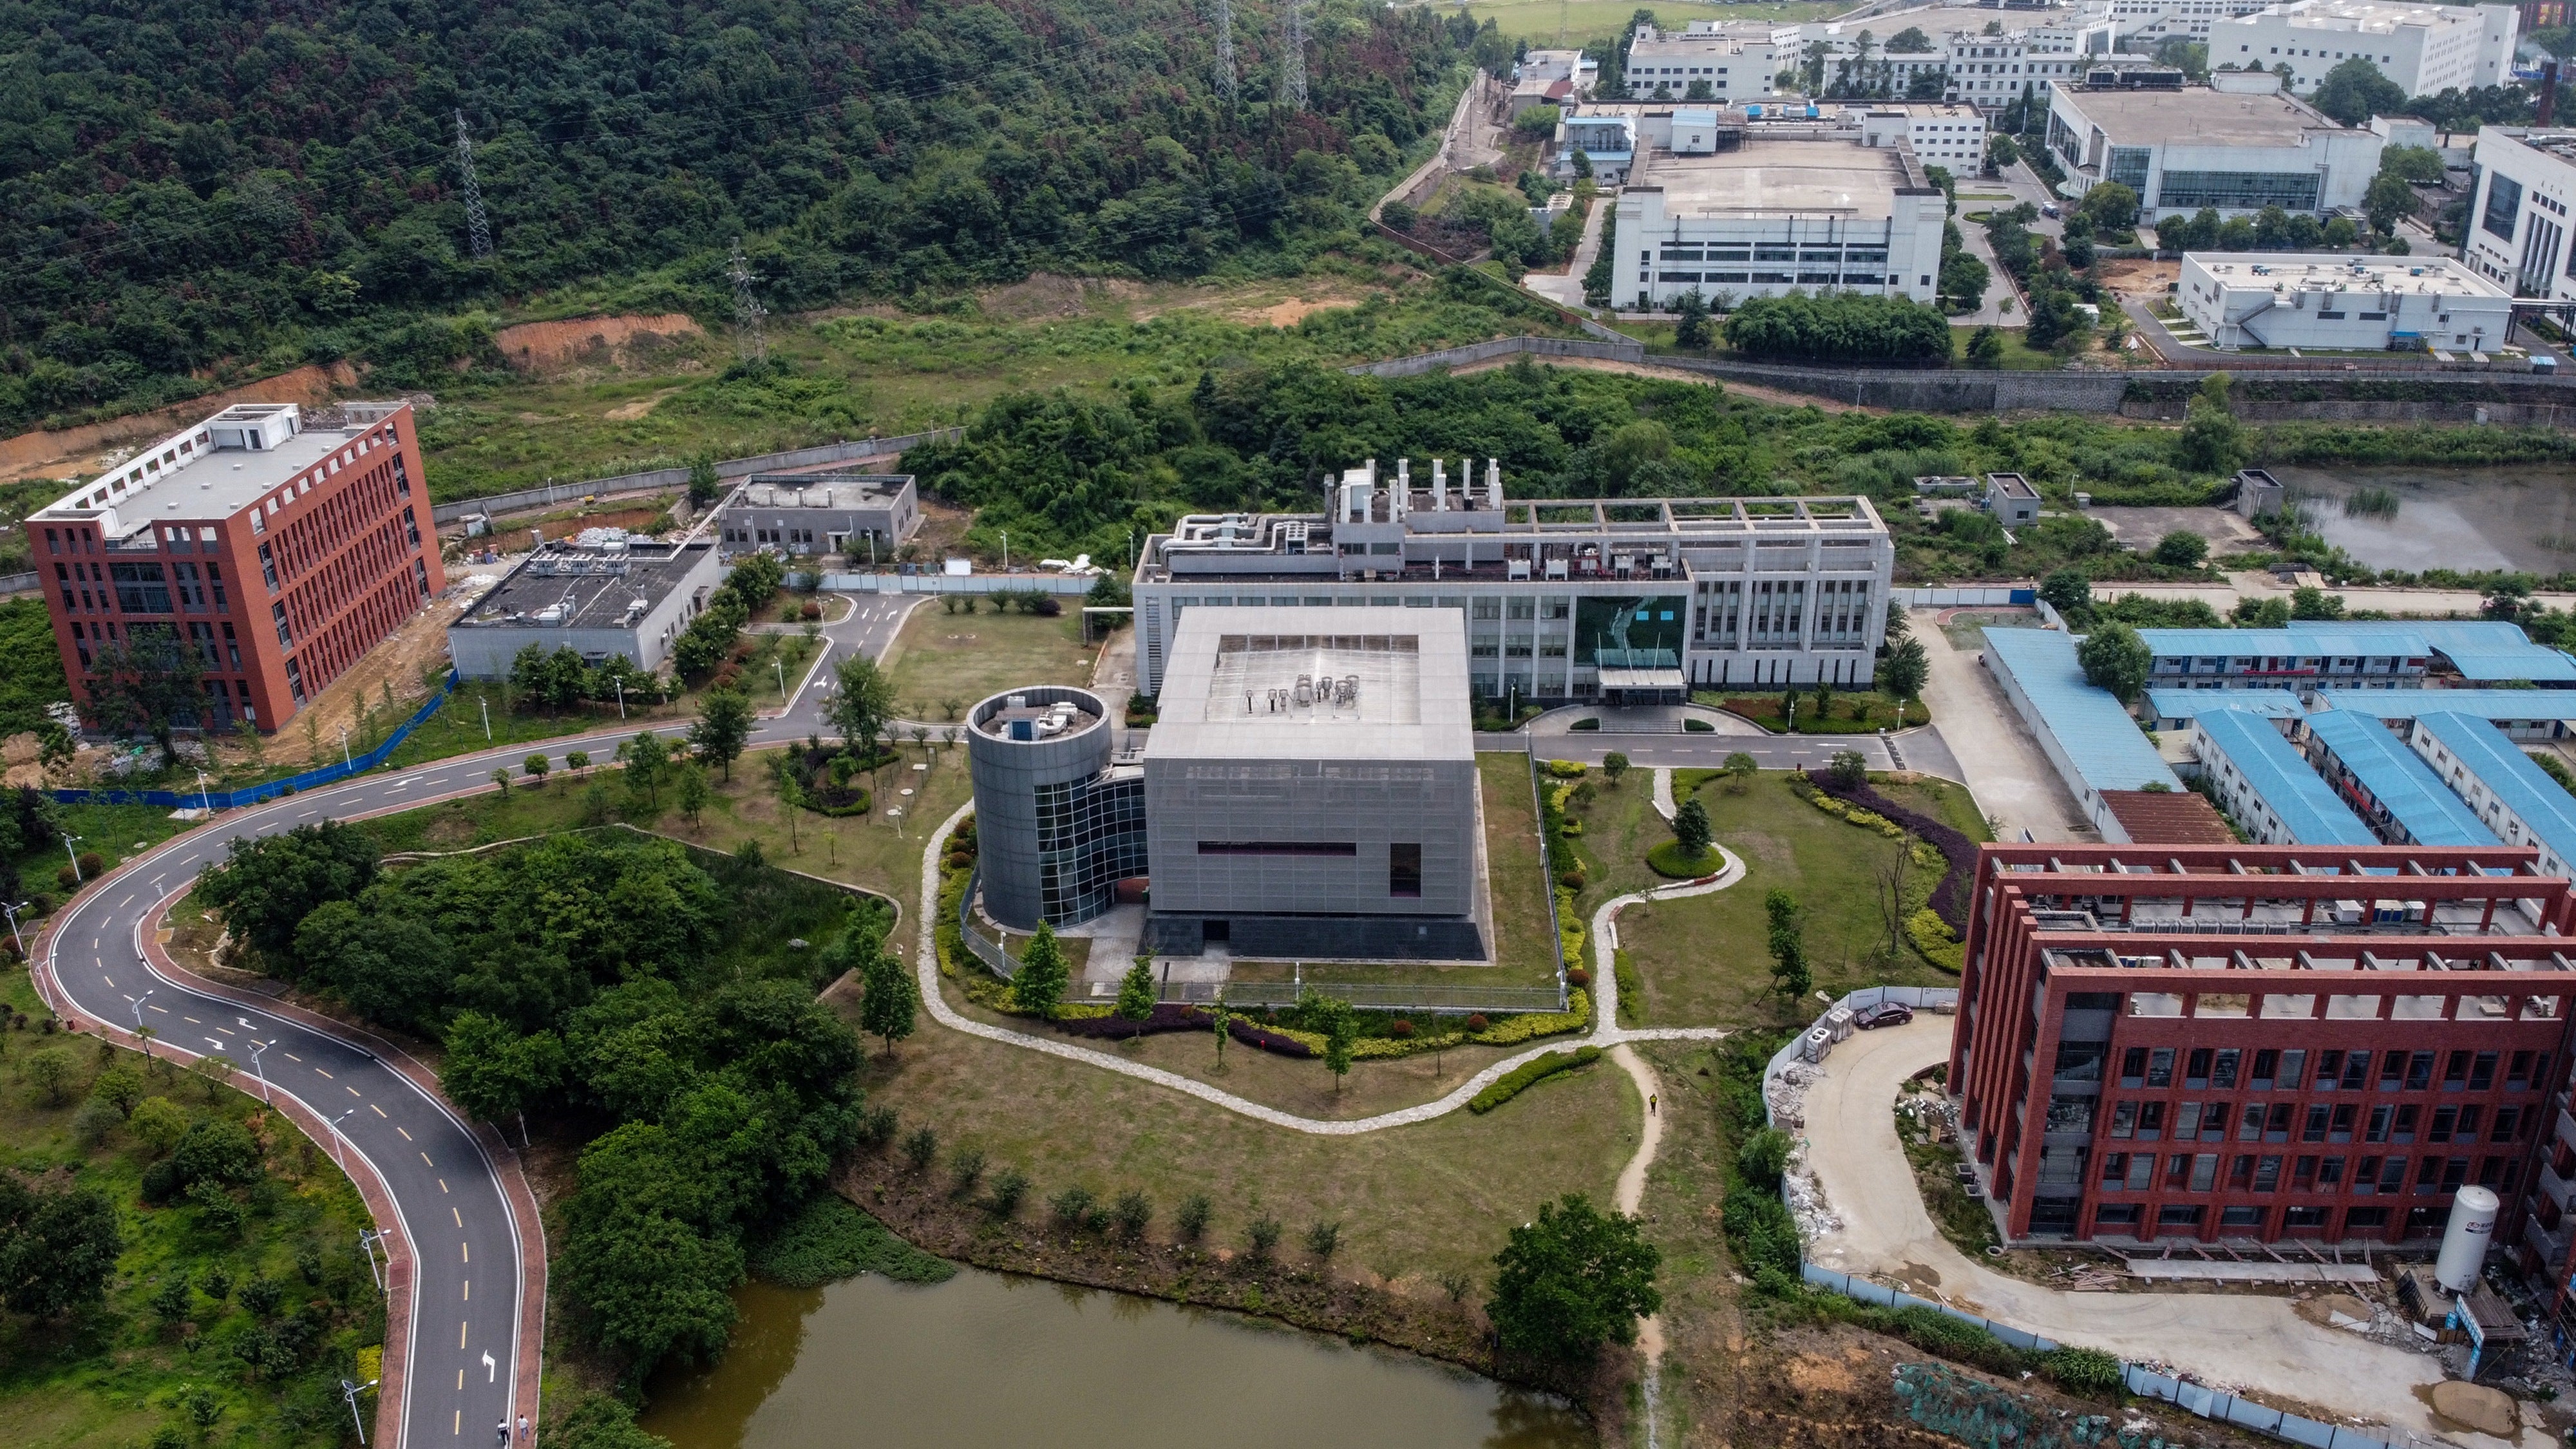 Institute of Virology in Wuhan, ninth largest city in China